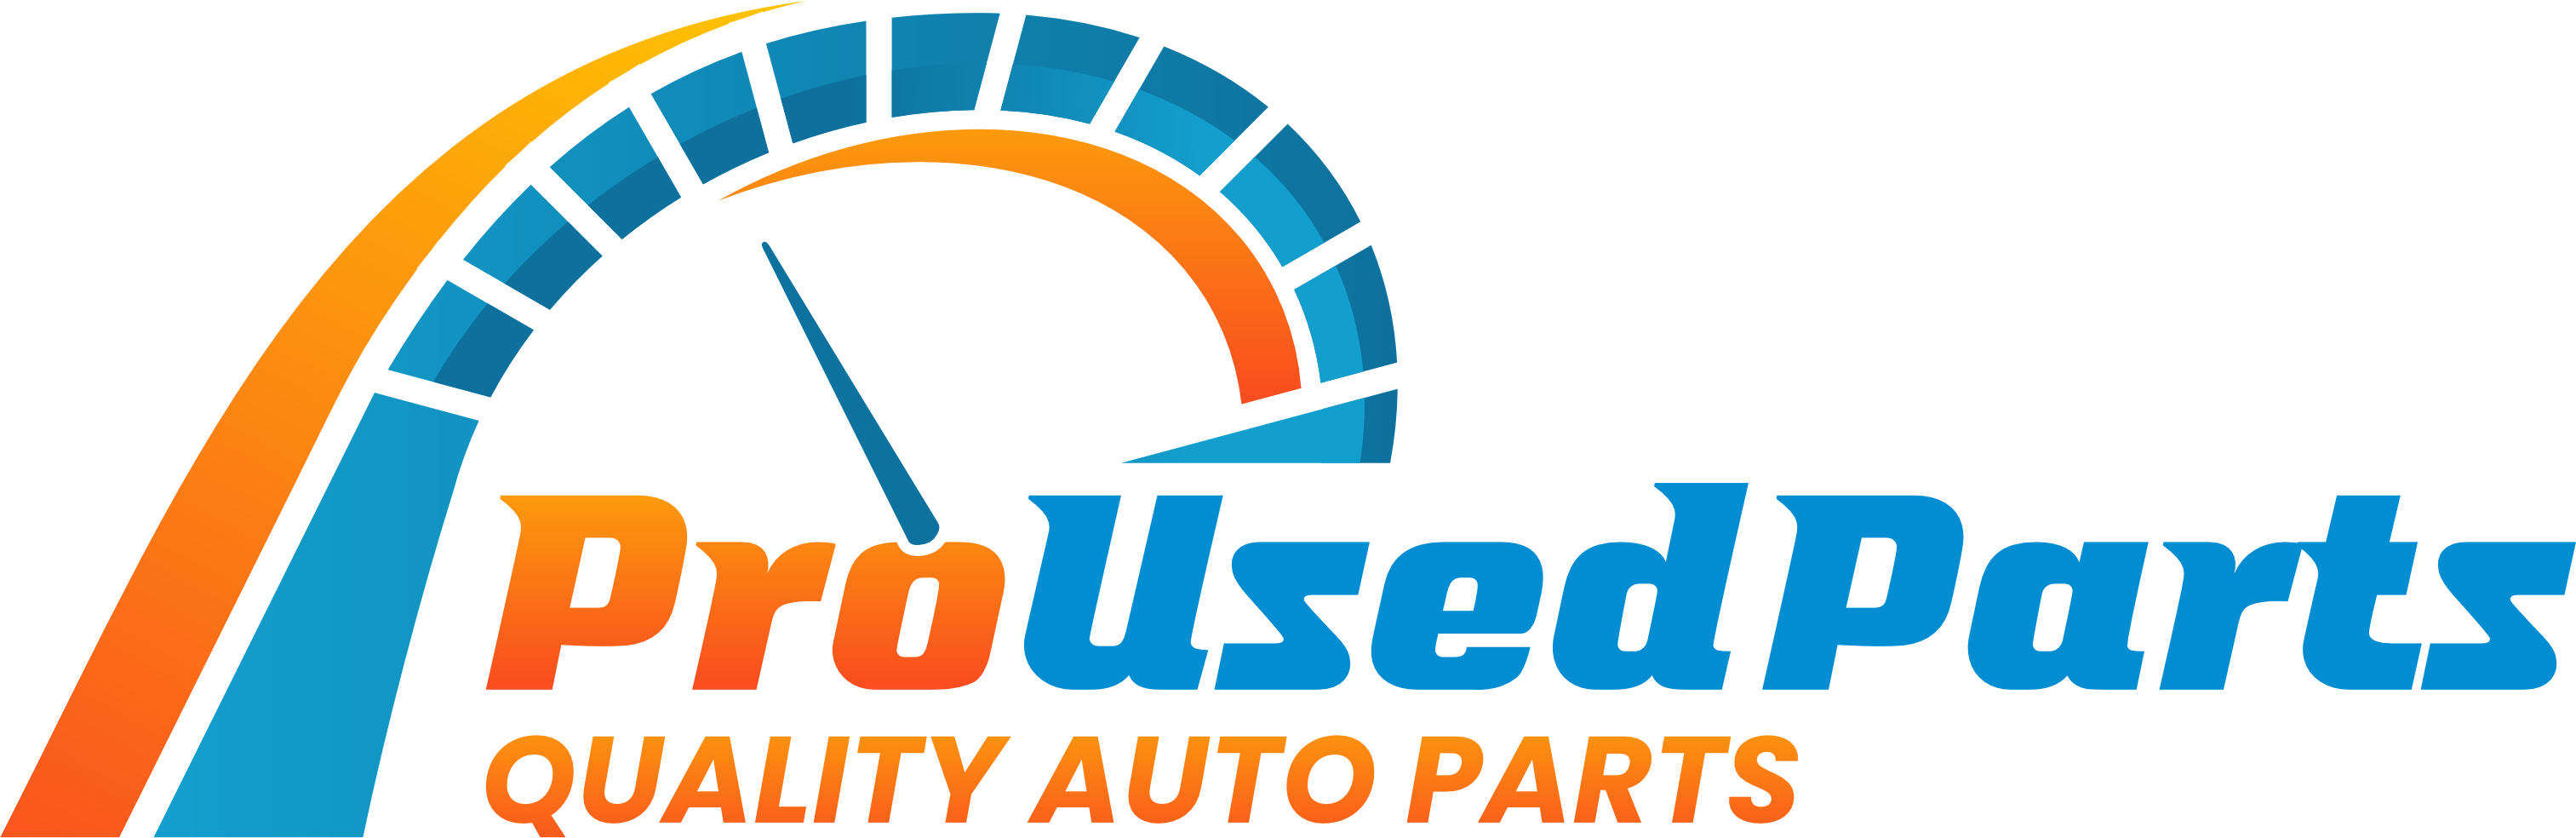 Buy Used Auto and Car Parts | Automotive | prousedparts